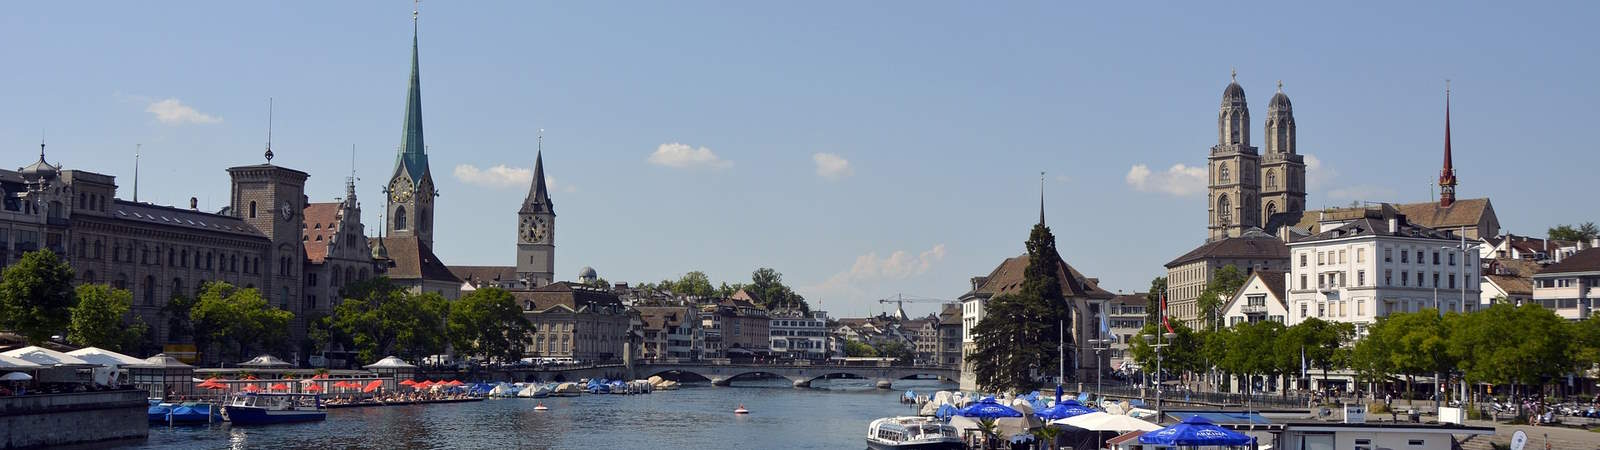 Find nearest private parking lots area on monthly paid rental nearby your places in Zurich, Switzerland